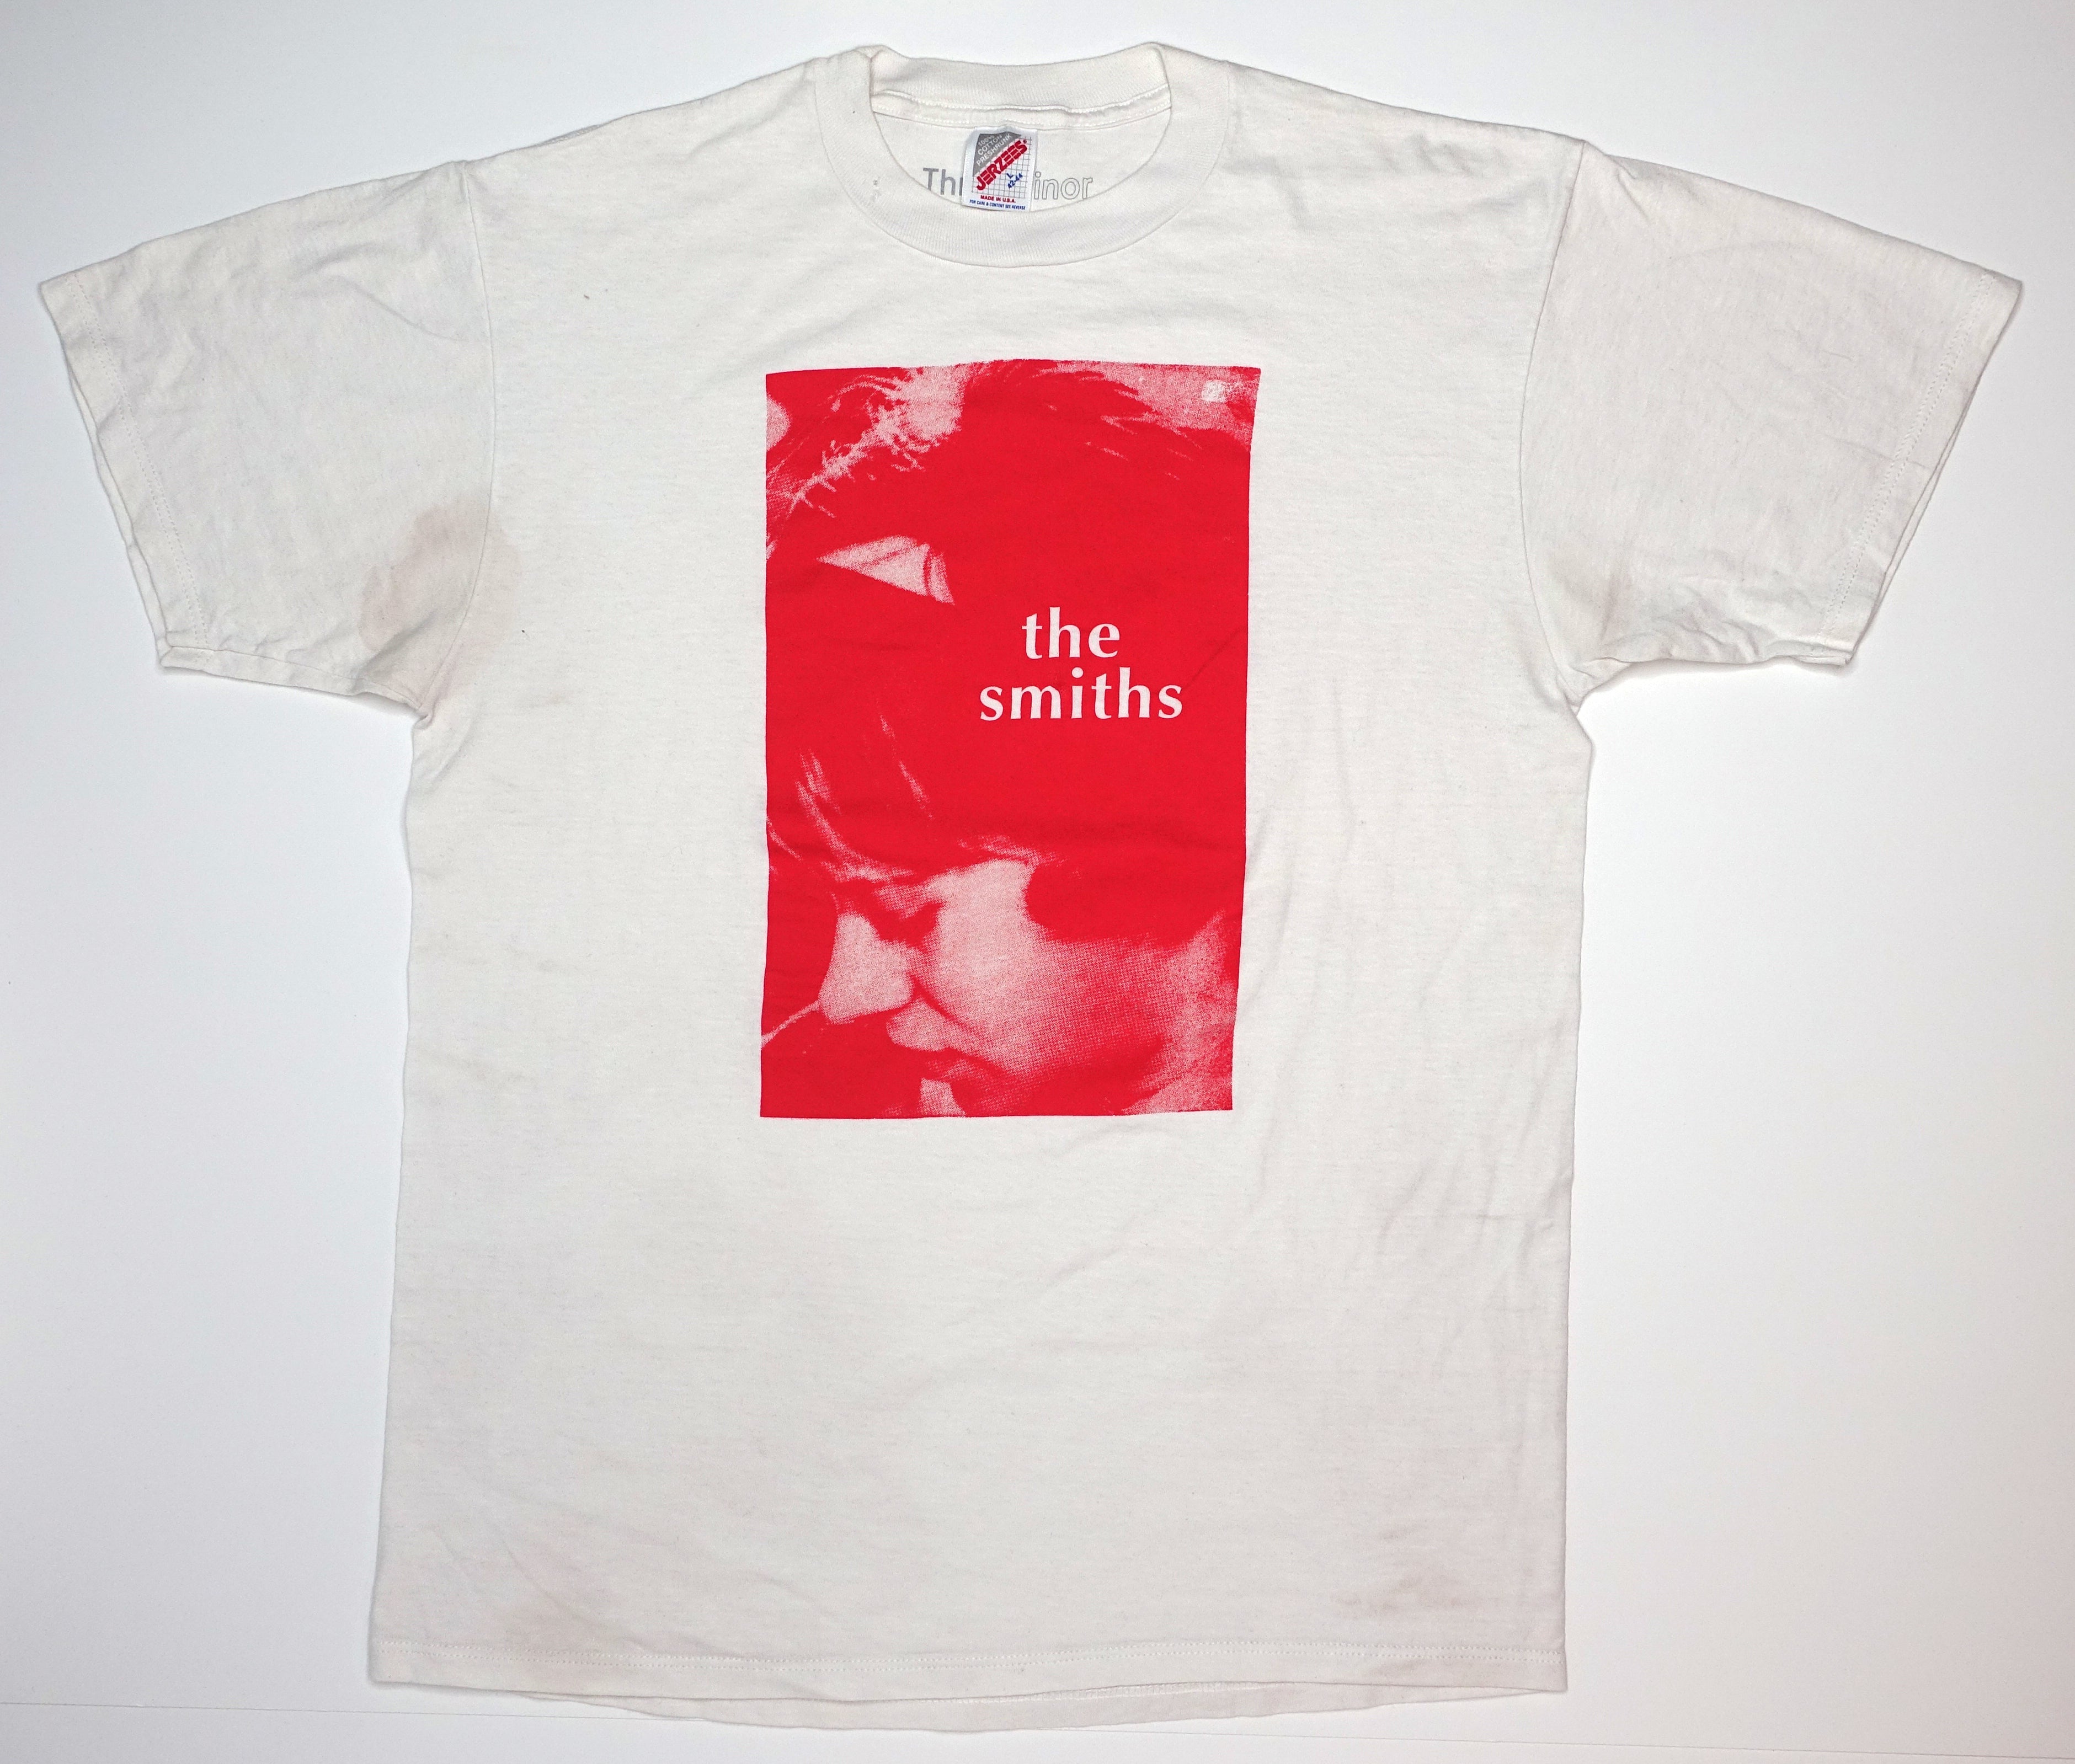 the Smiths - Hand In Glove Shirt (Bootleg by Me) Size Large